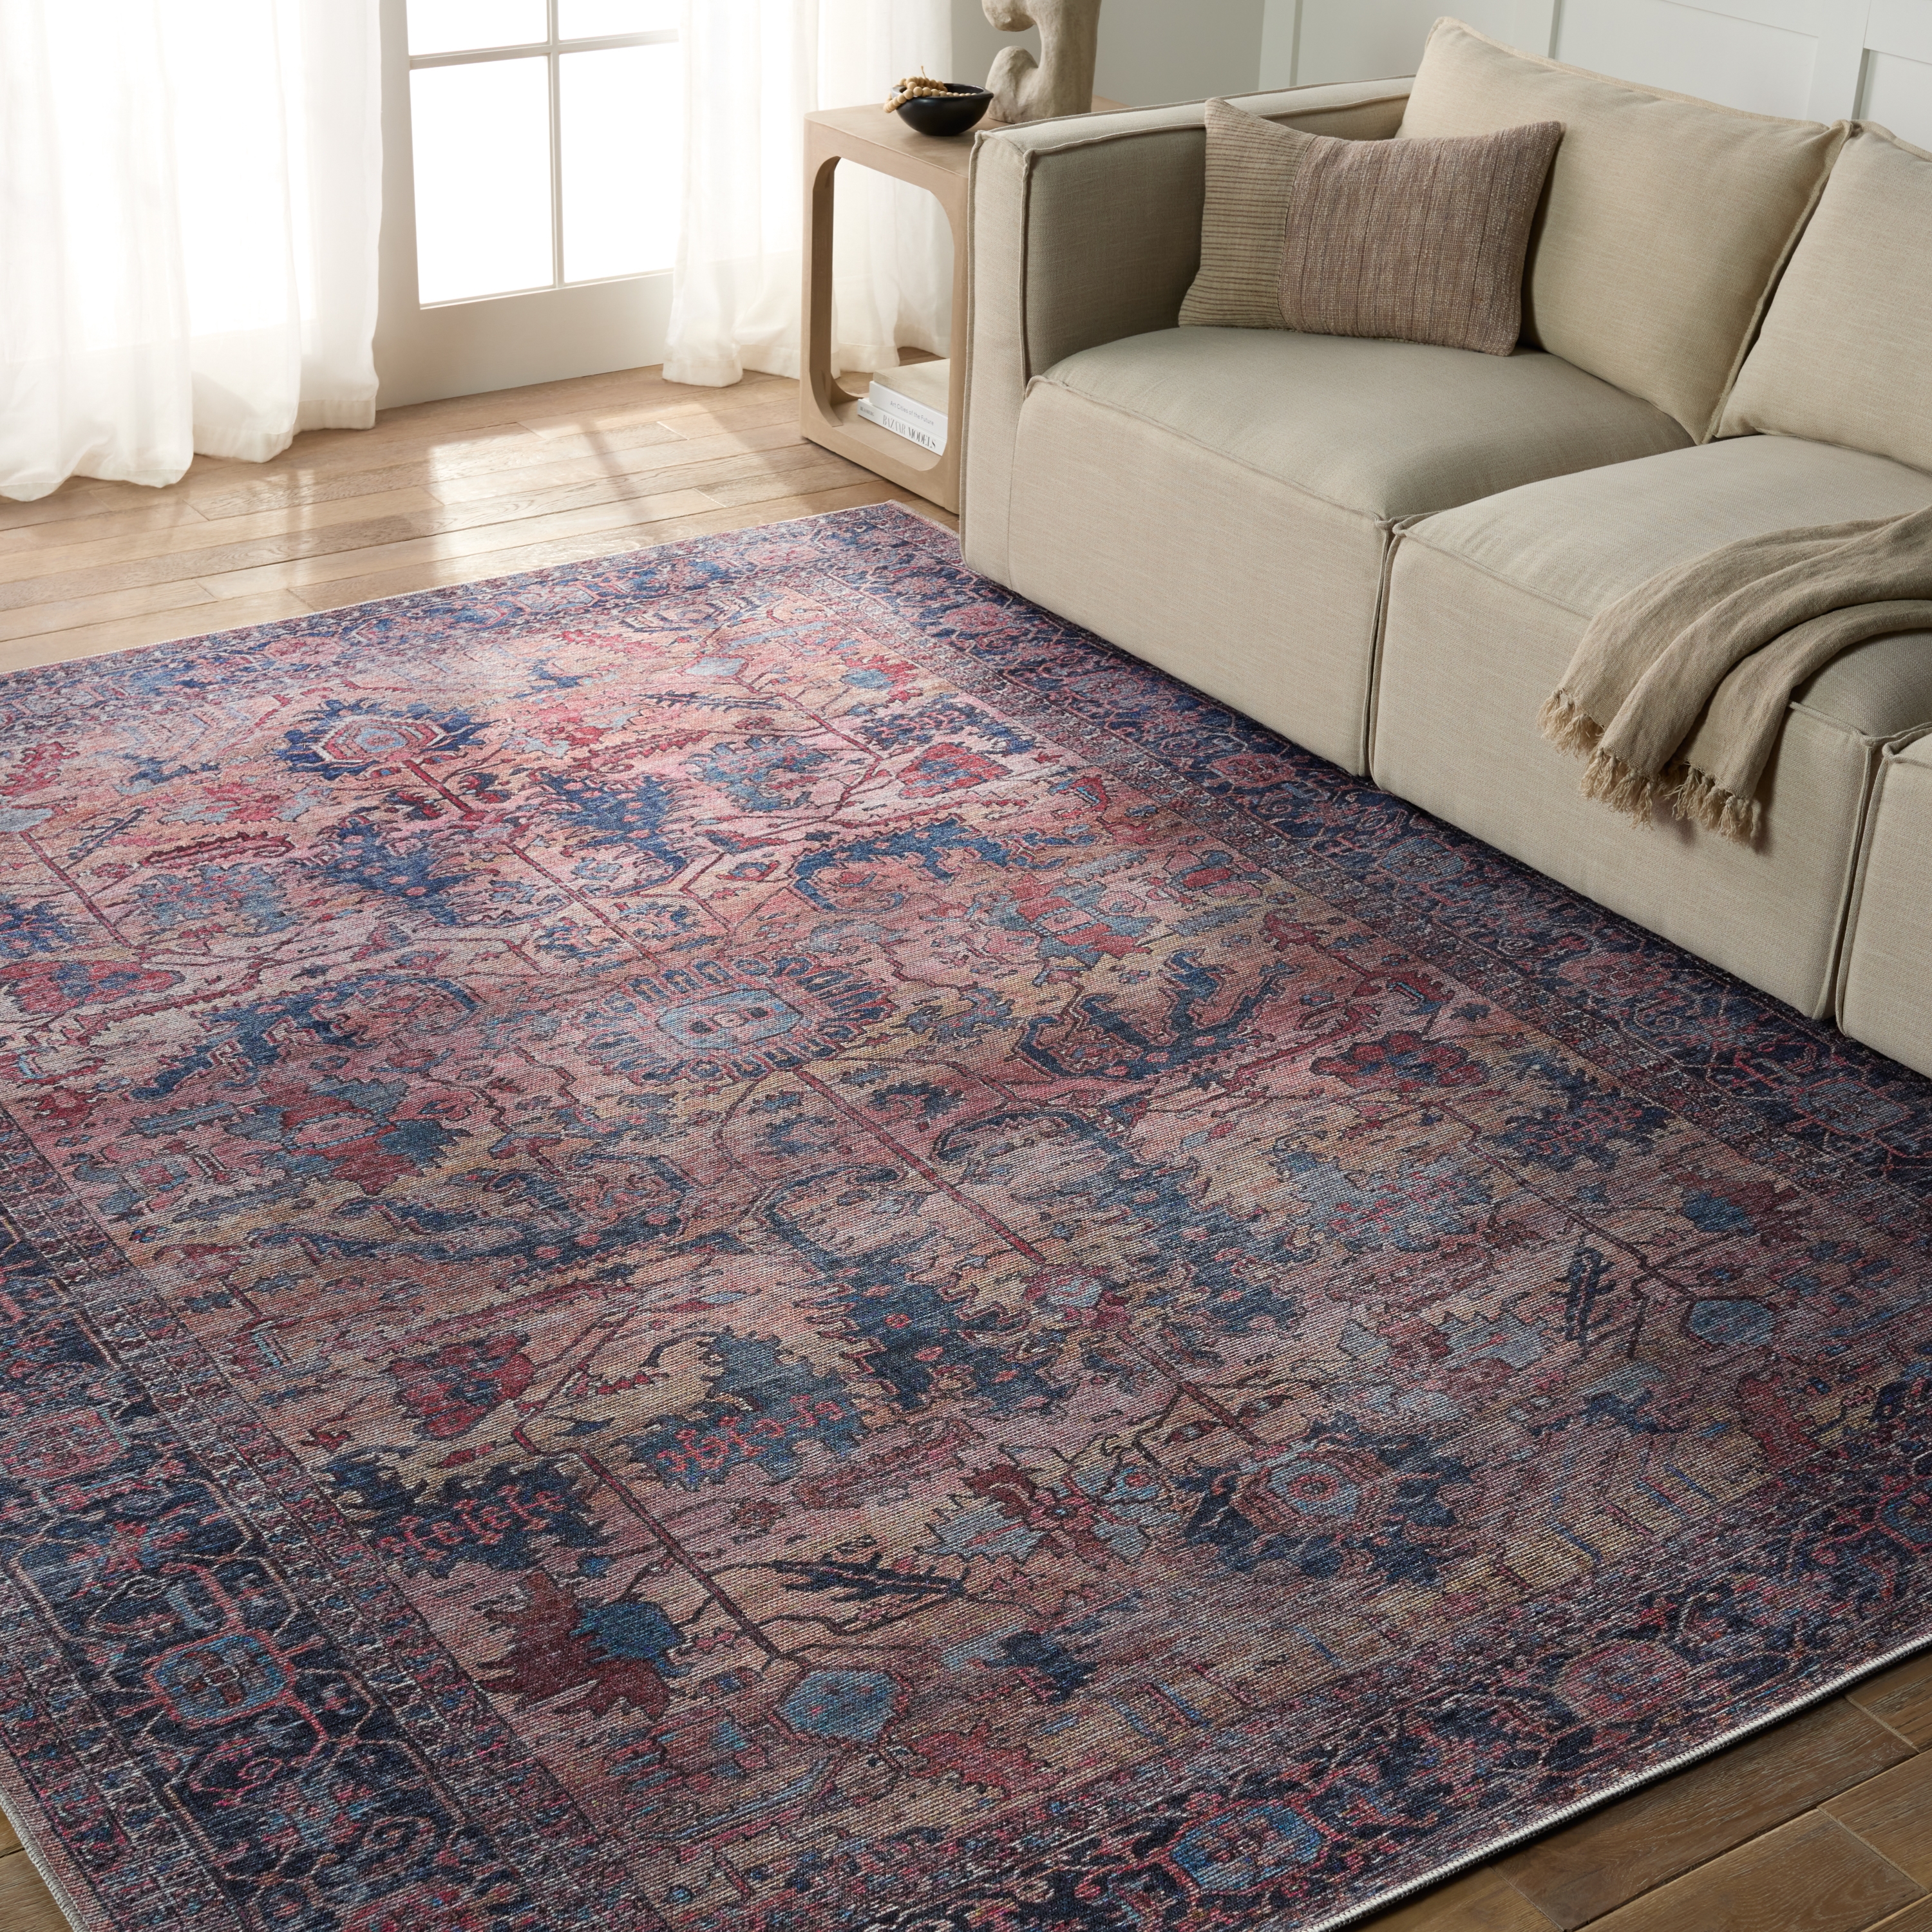 Vibe by Ainsworth Medallion Blue/ Pink Runner Rug (3'X8') - Image 4